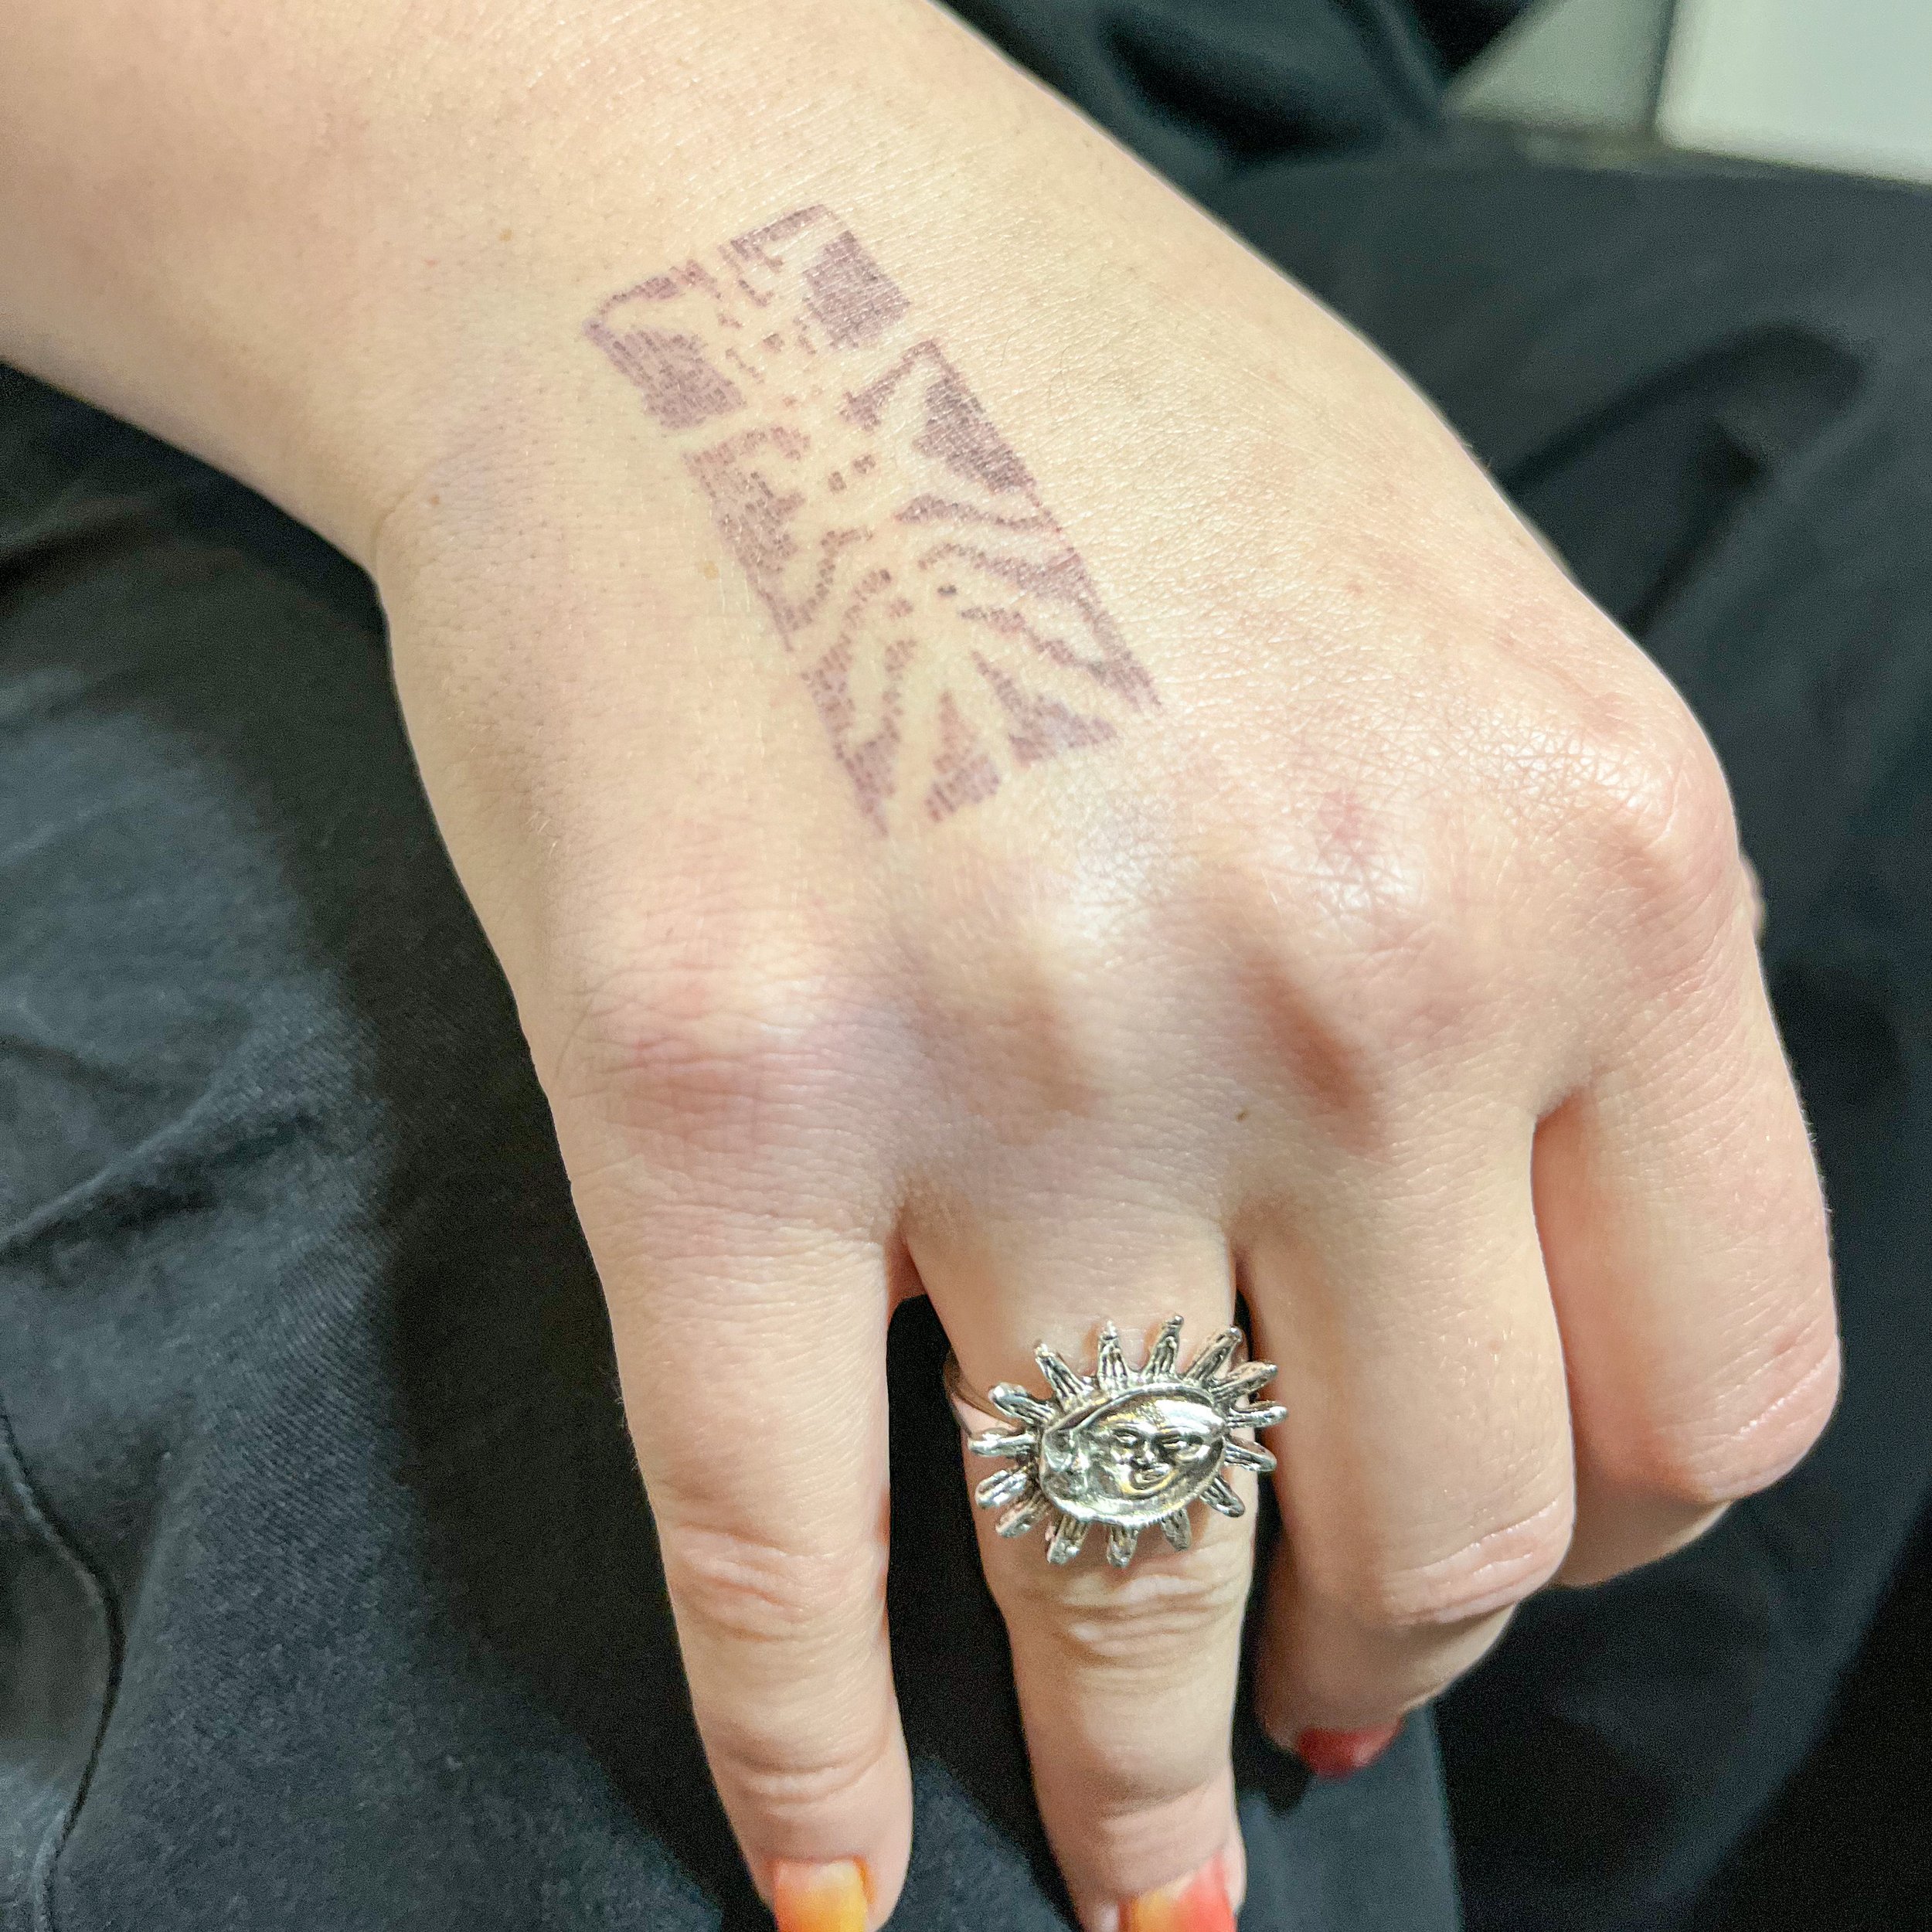 Texture tattoo on hand by ay_seed.jpg